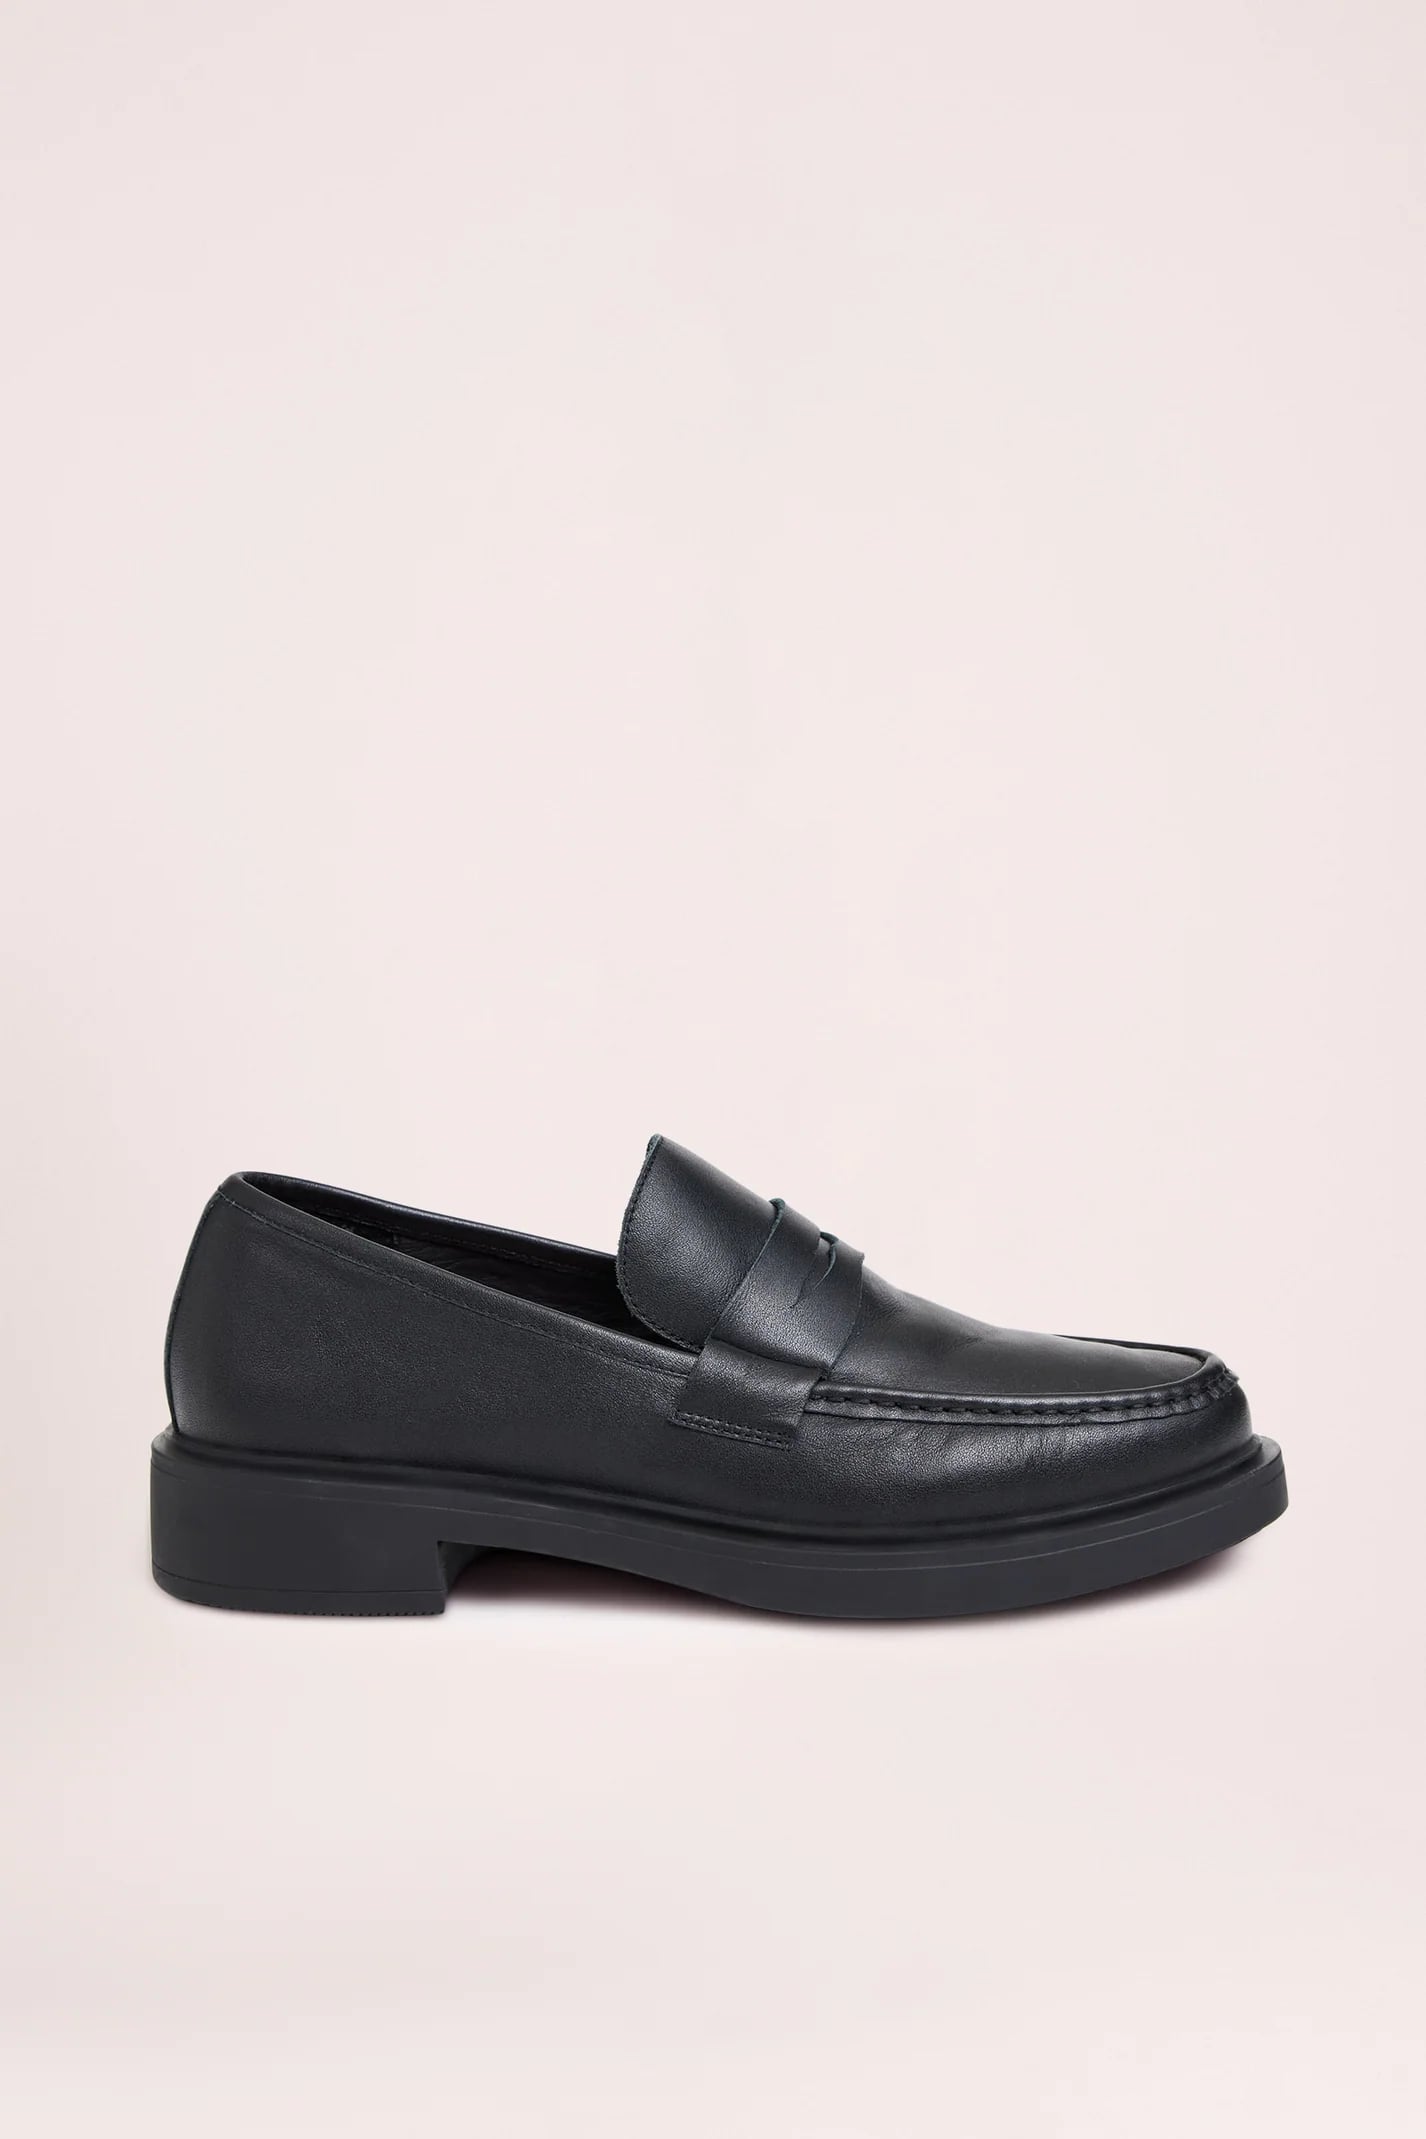 NUDE LUCY  - ALLEGRA LEATHER LOAFER - BLACK